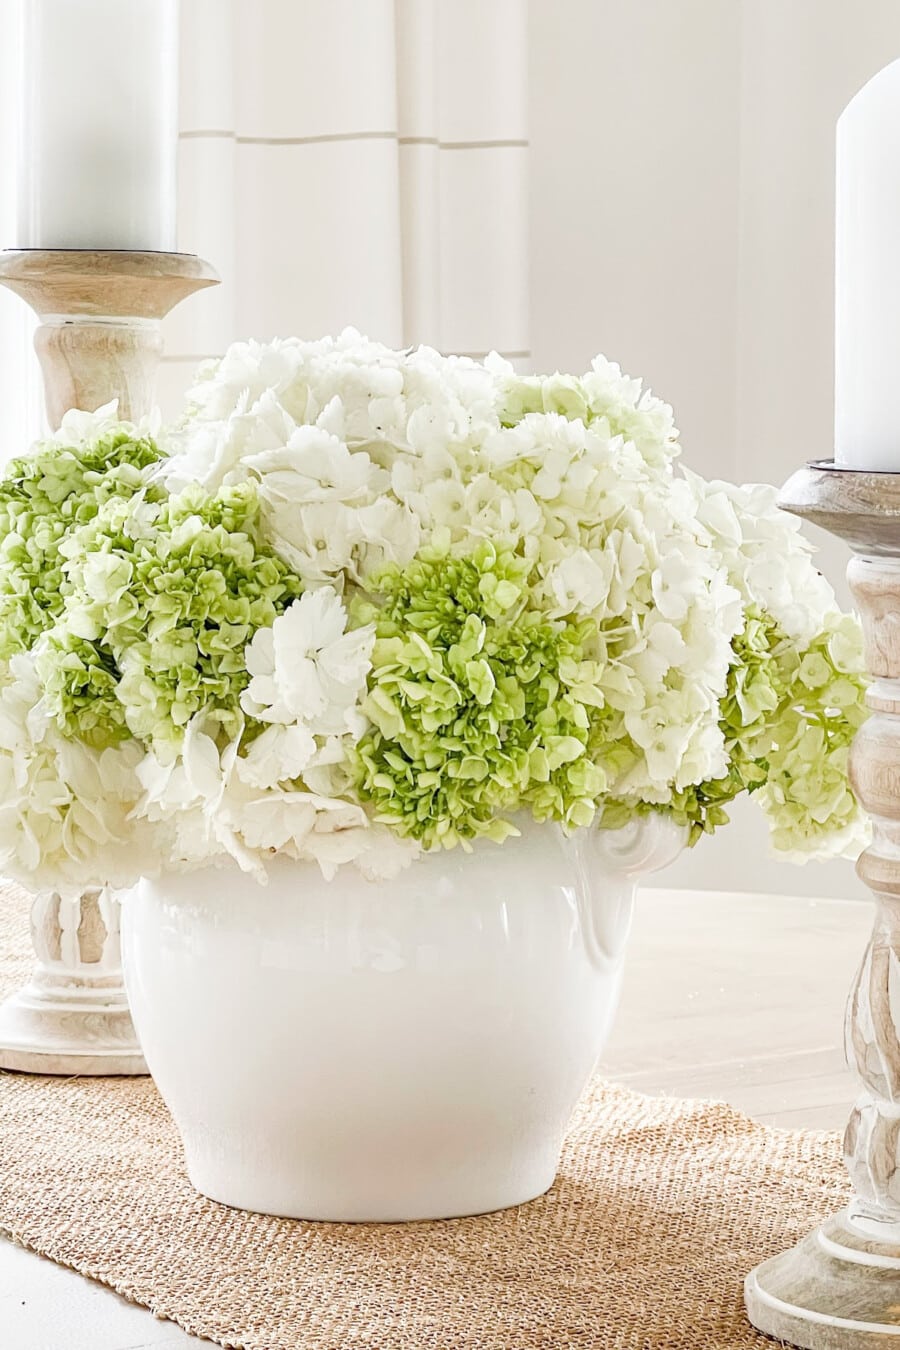 Keeping Hydrangeas Fresh Longer + dream home, lots of summers decorating ideas, personalizing artwork, and more